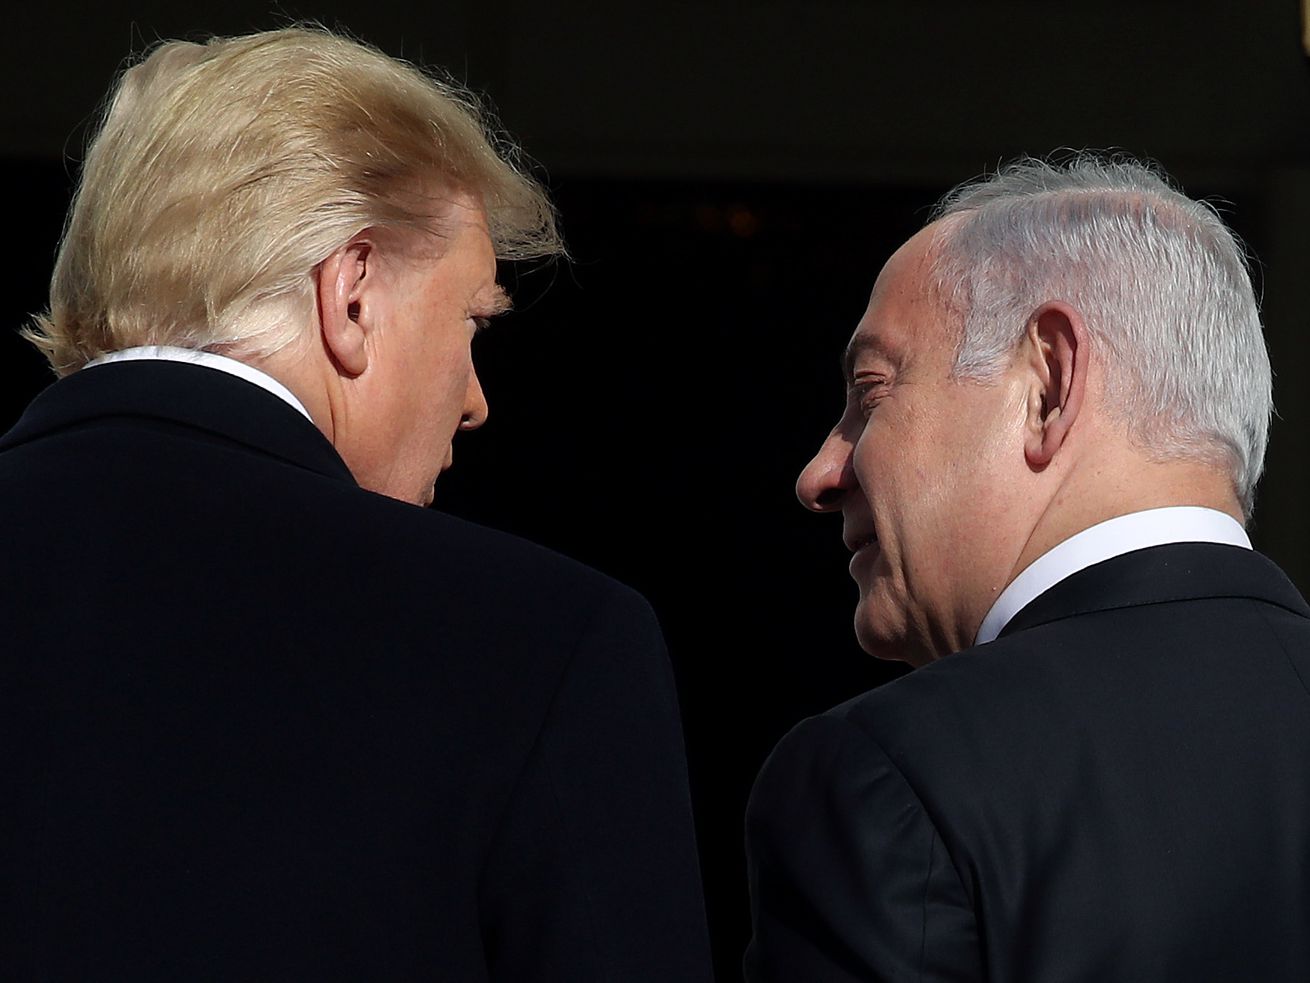 To understand what the Trump investigation might do to America, look at Israel